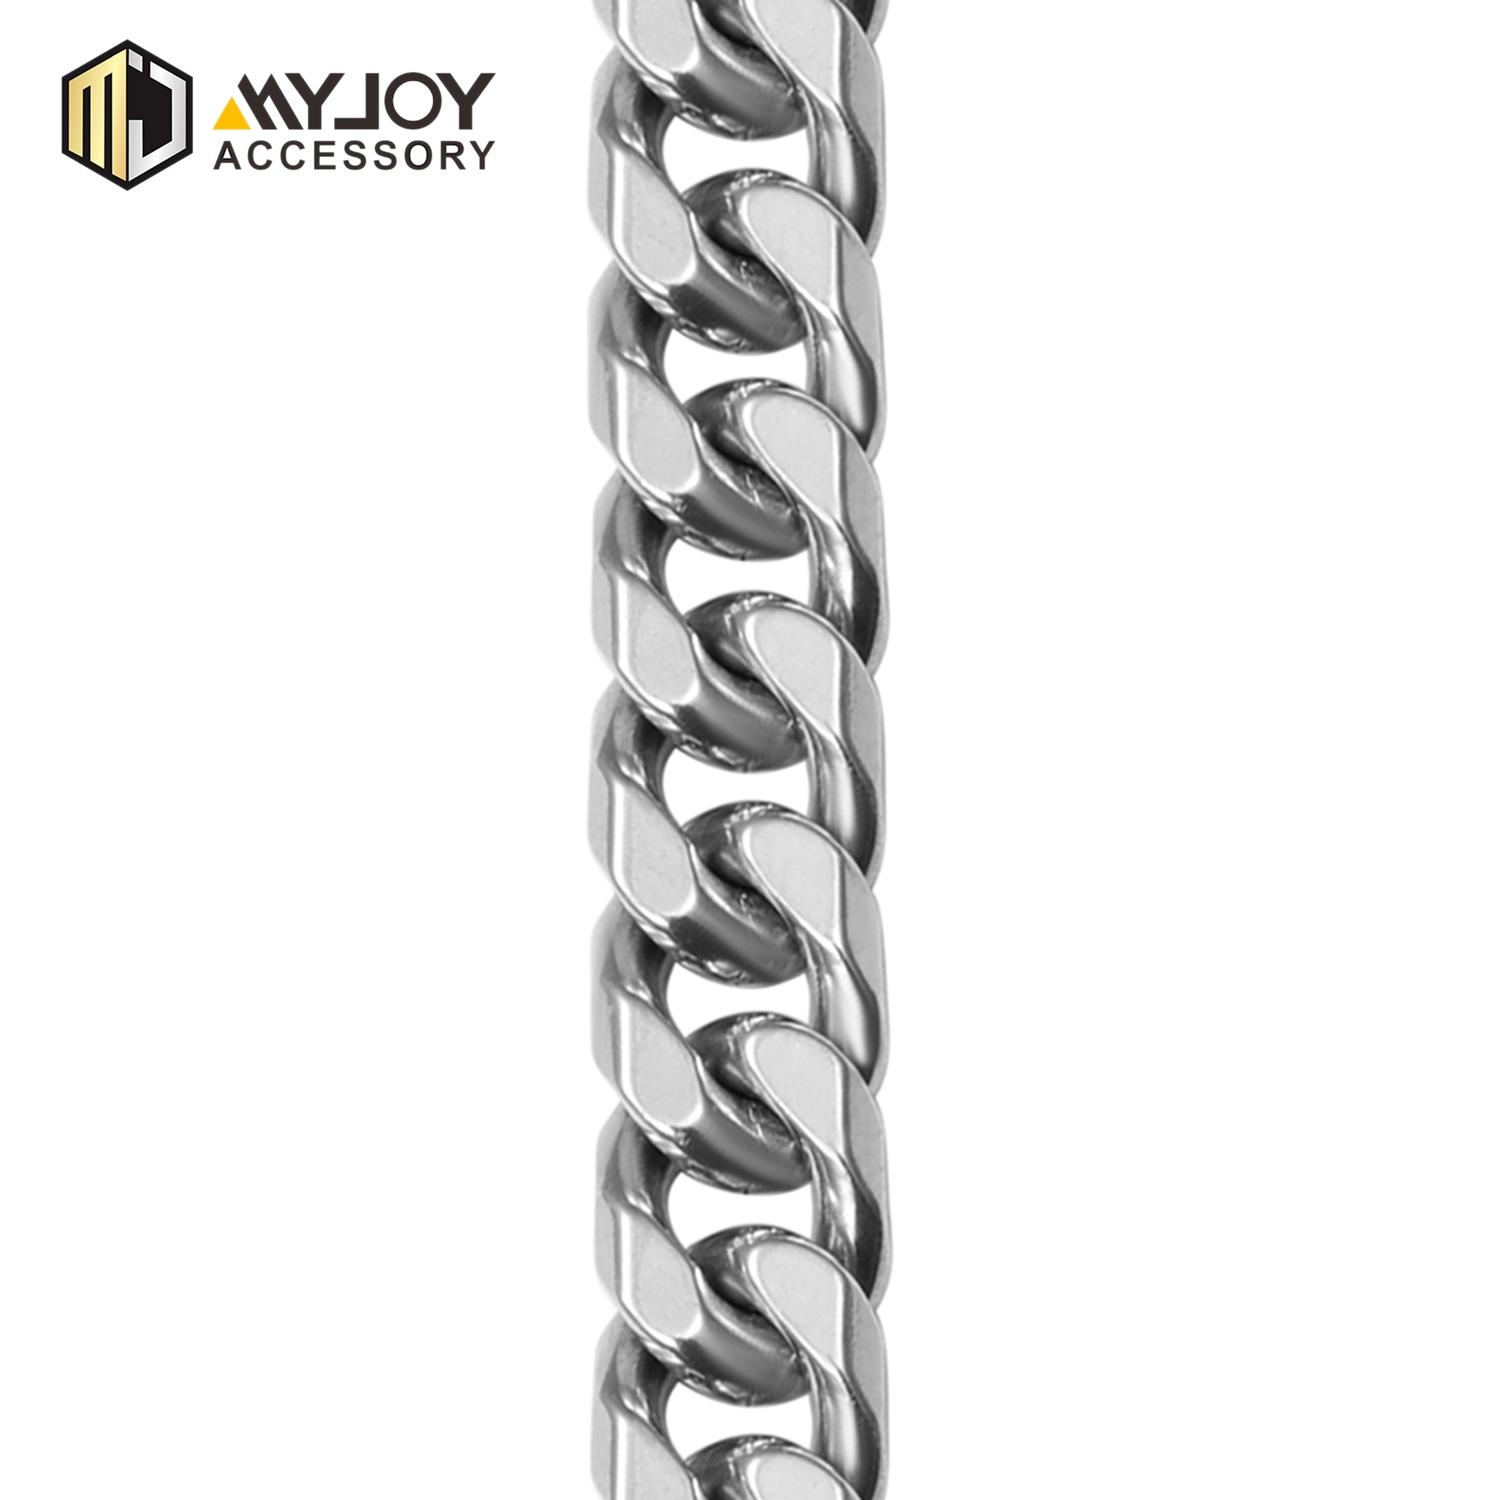 MYJOY Wholesale strap chain Suppliers for handbag-1